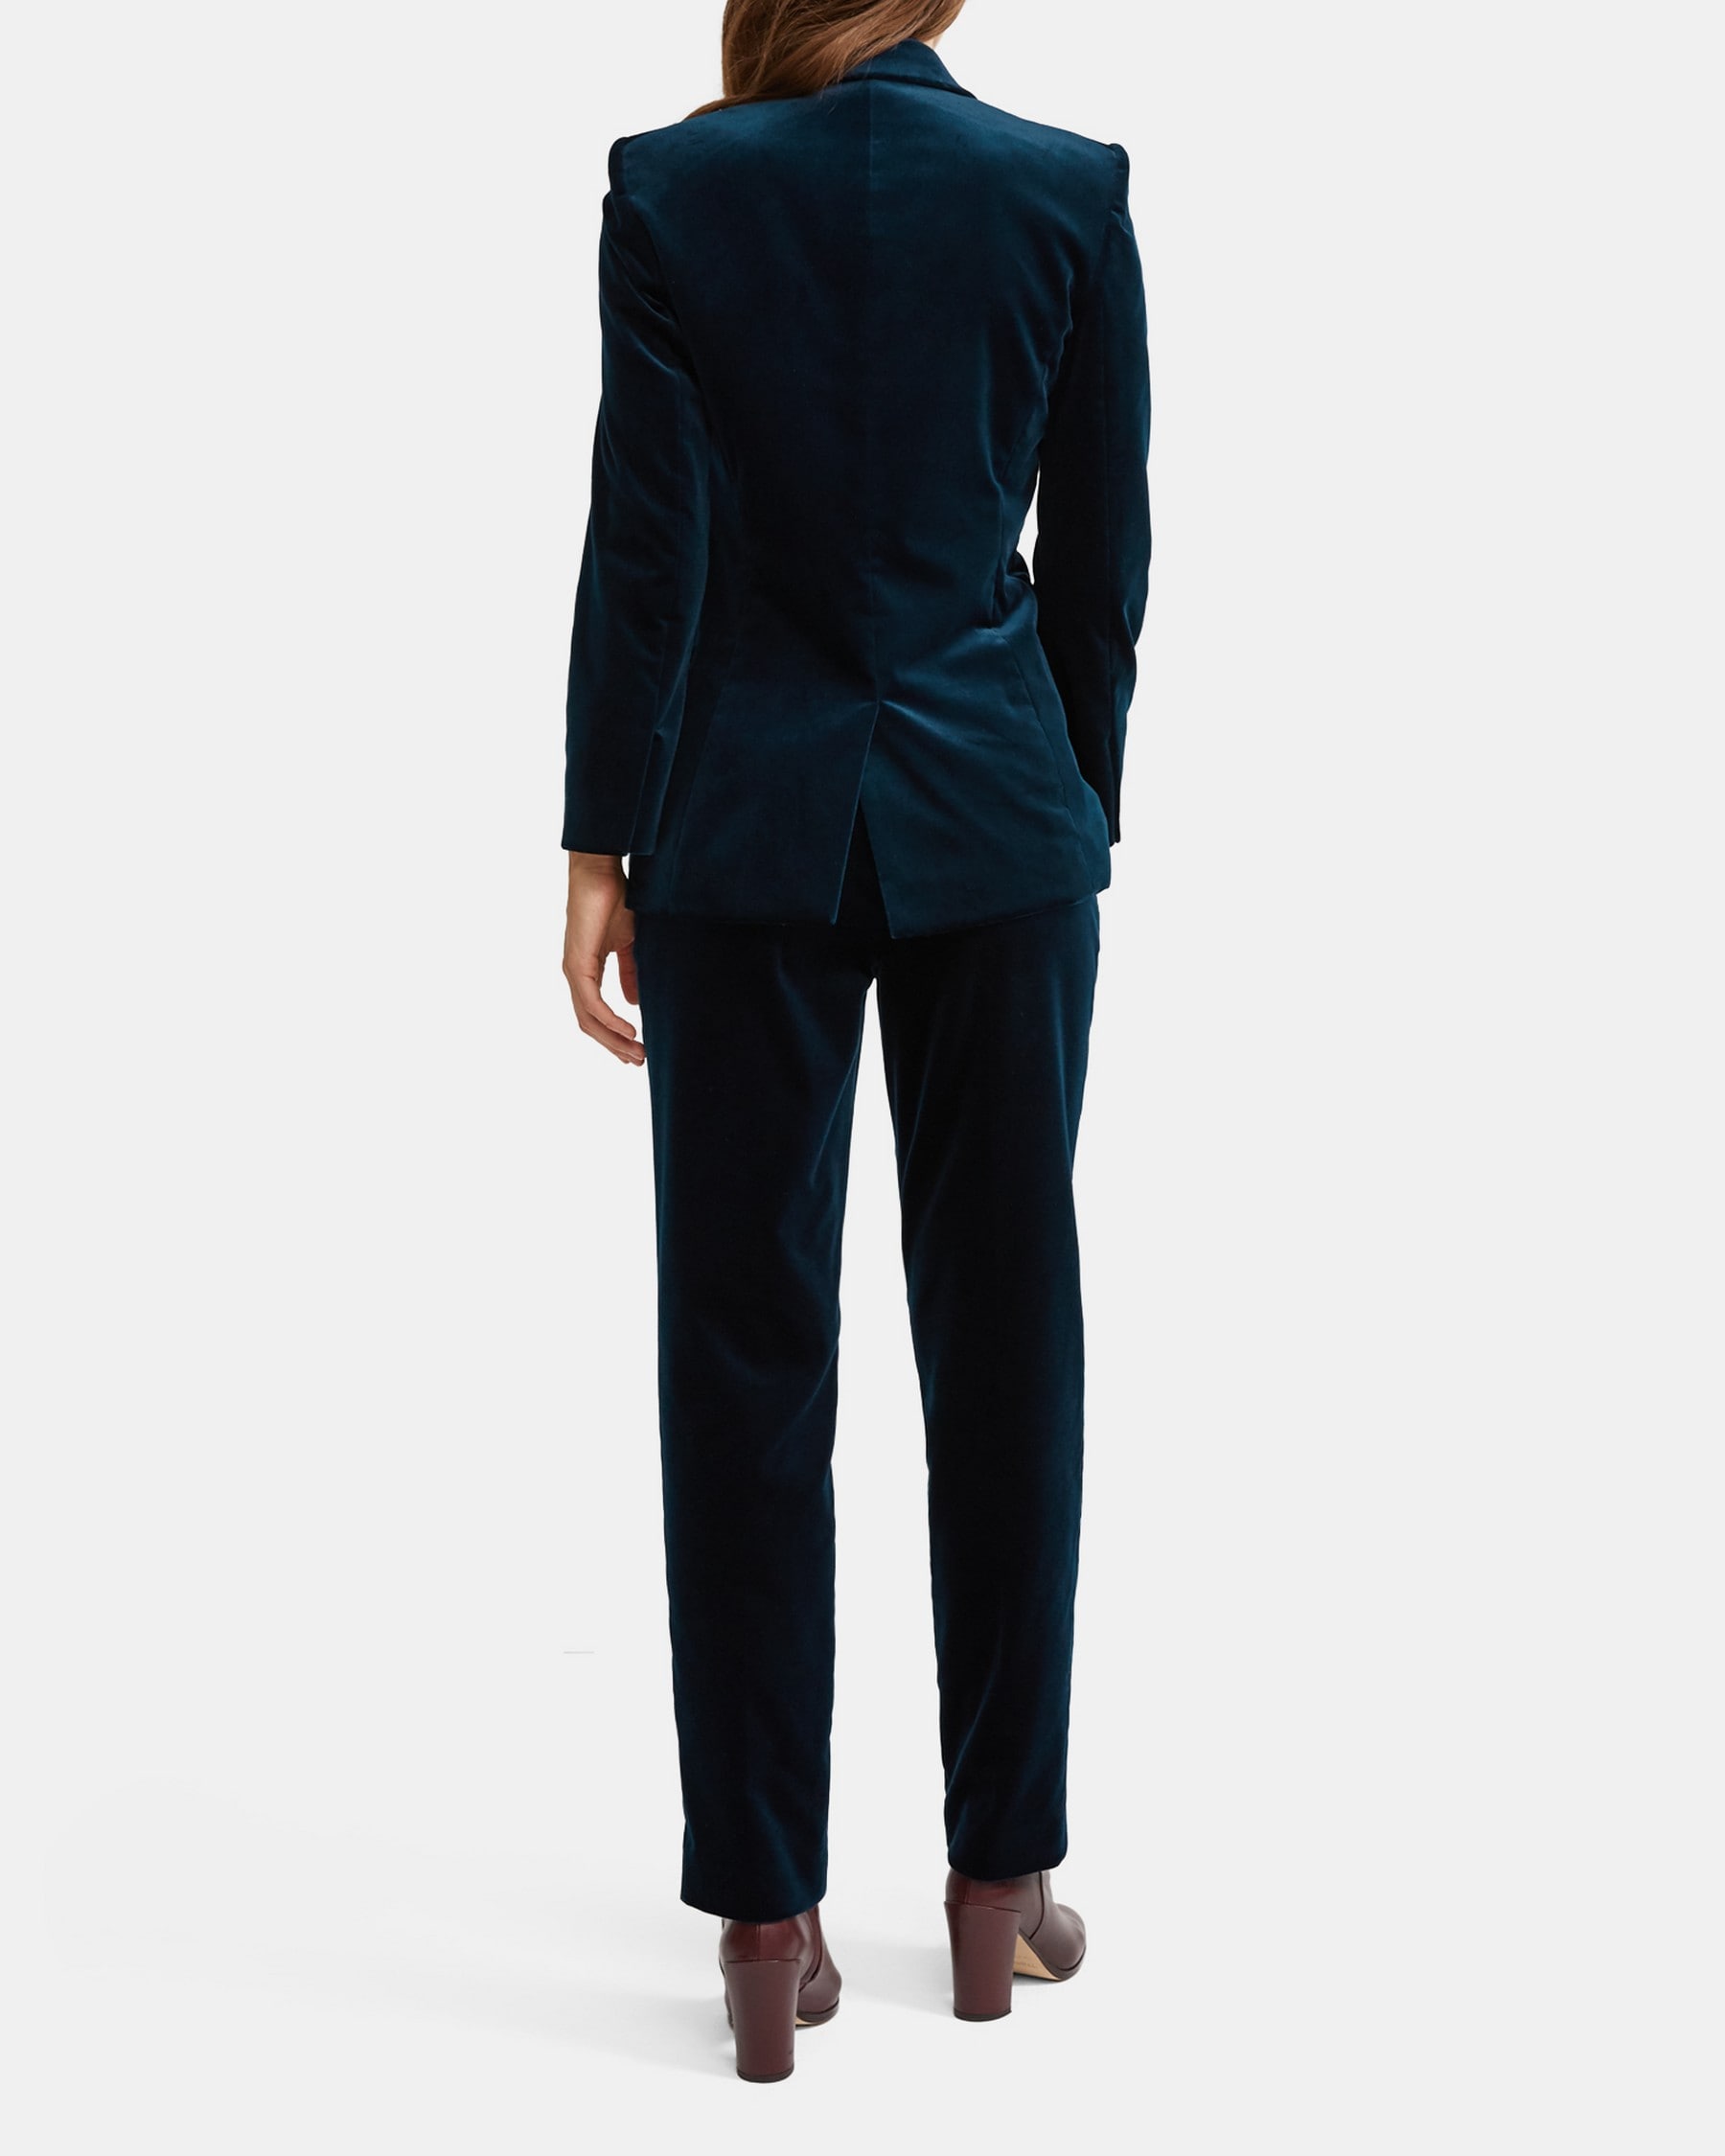 TAILORED TROUSER